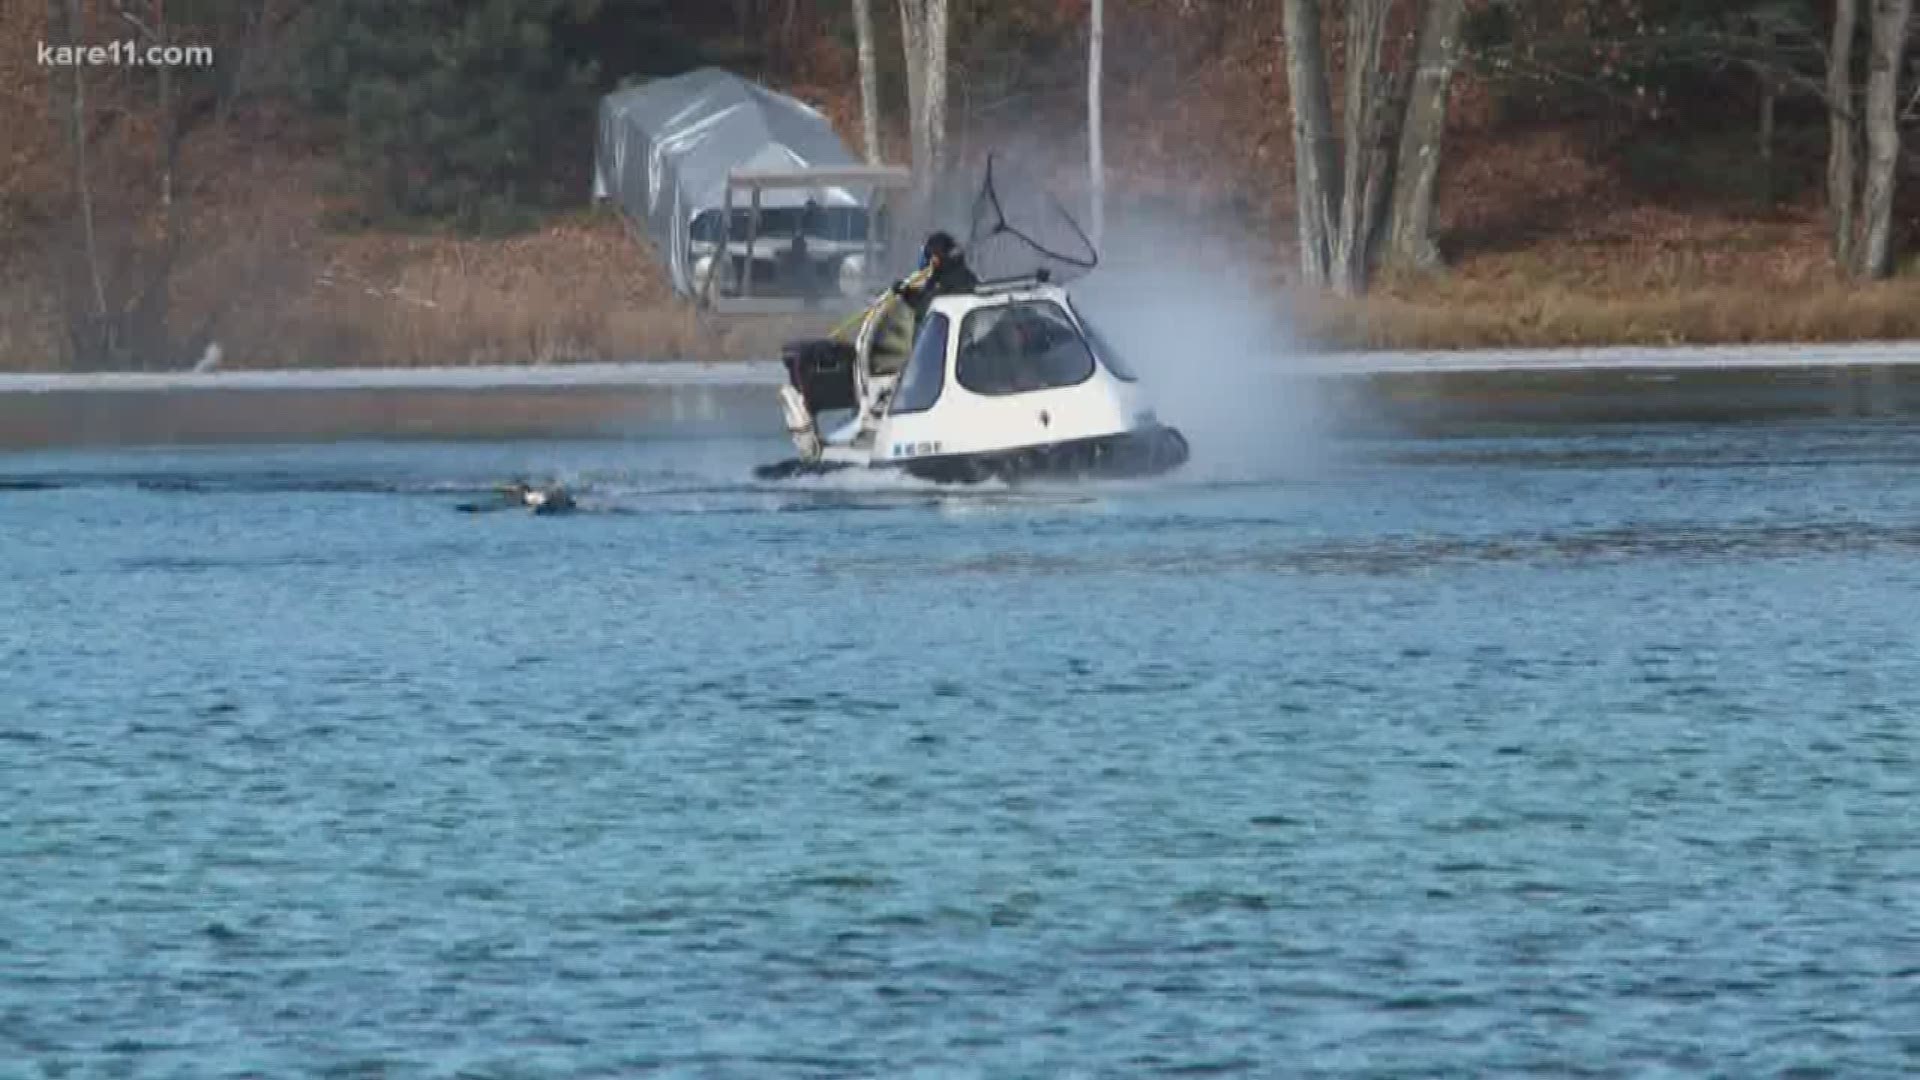 Kevin and Linda Grenzer have used a hovercraft for several years to help save loons throughout Wisconsin.